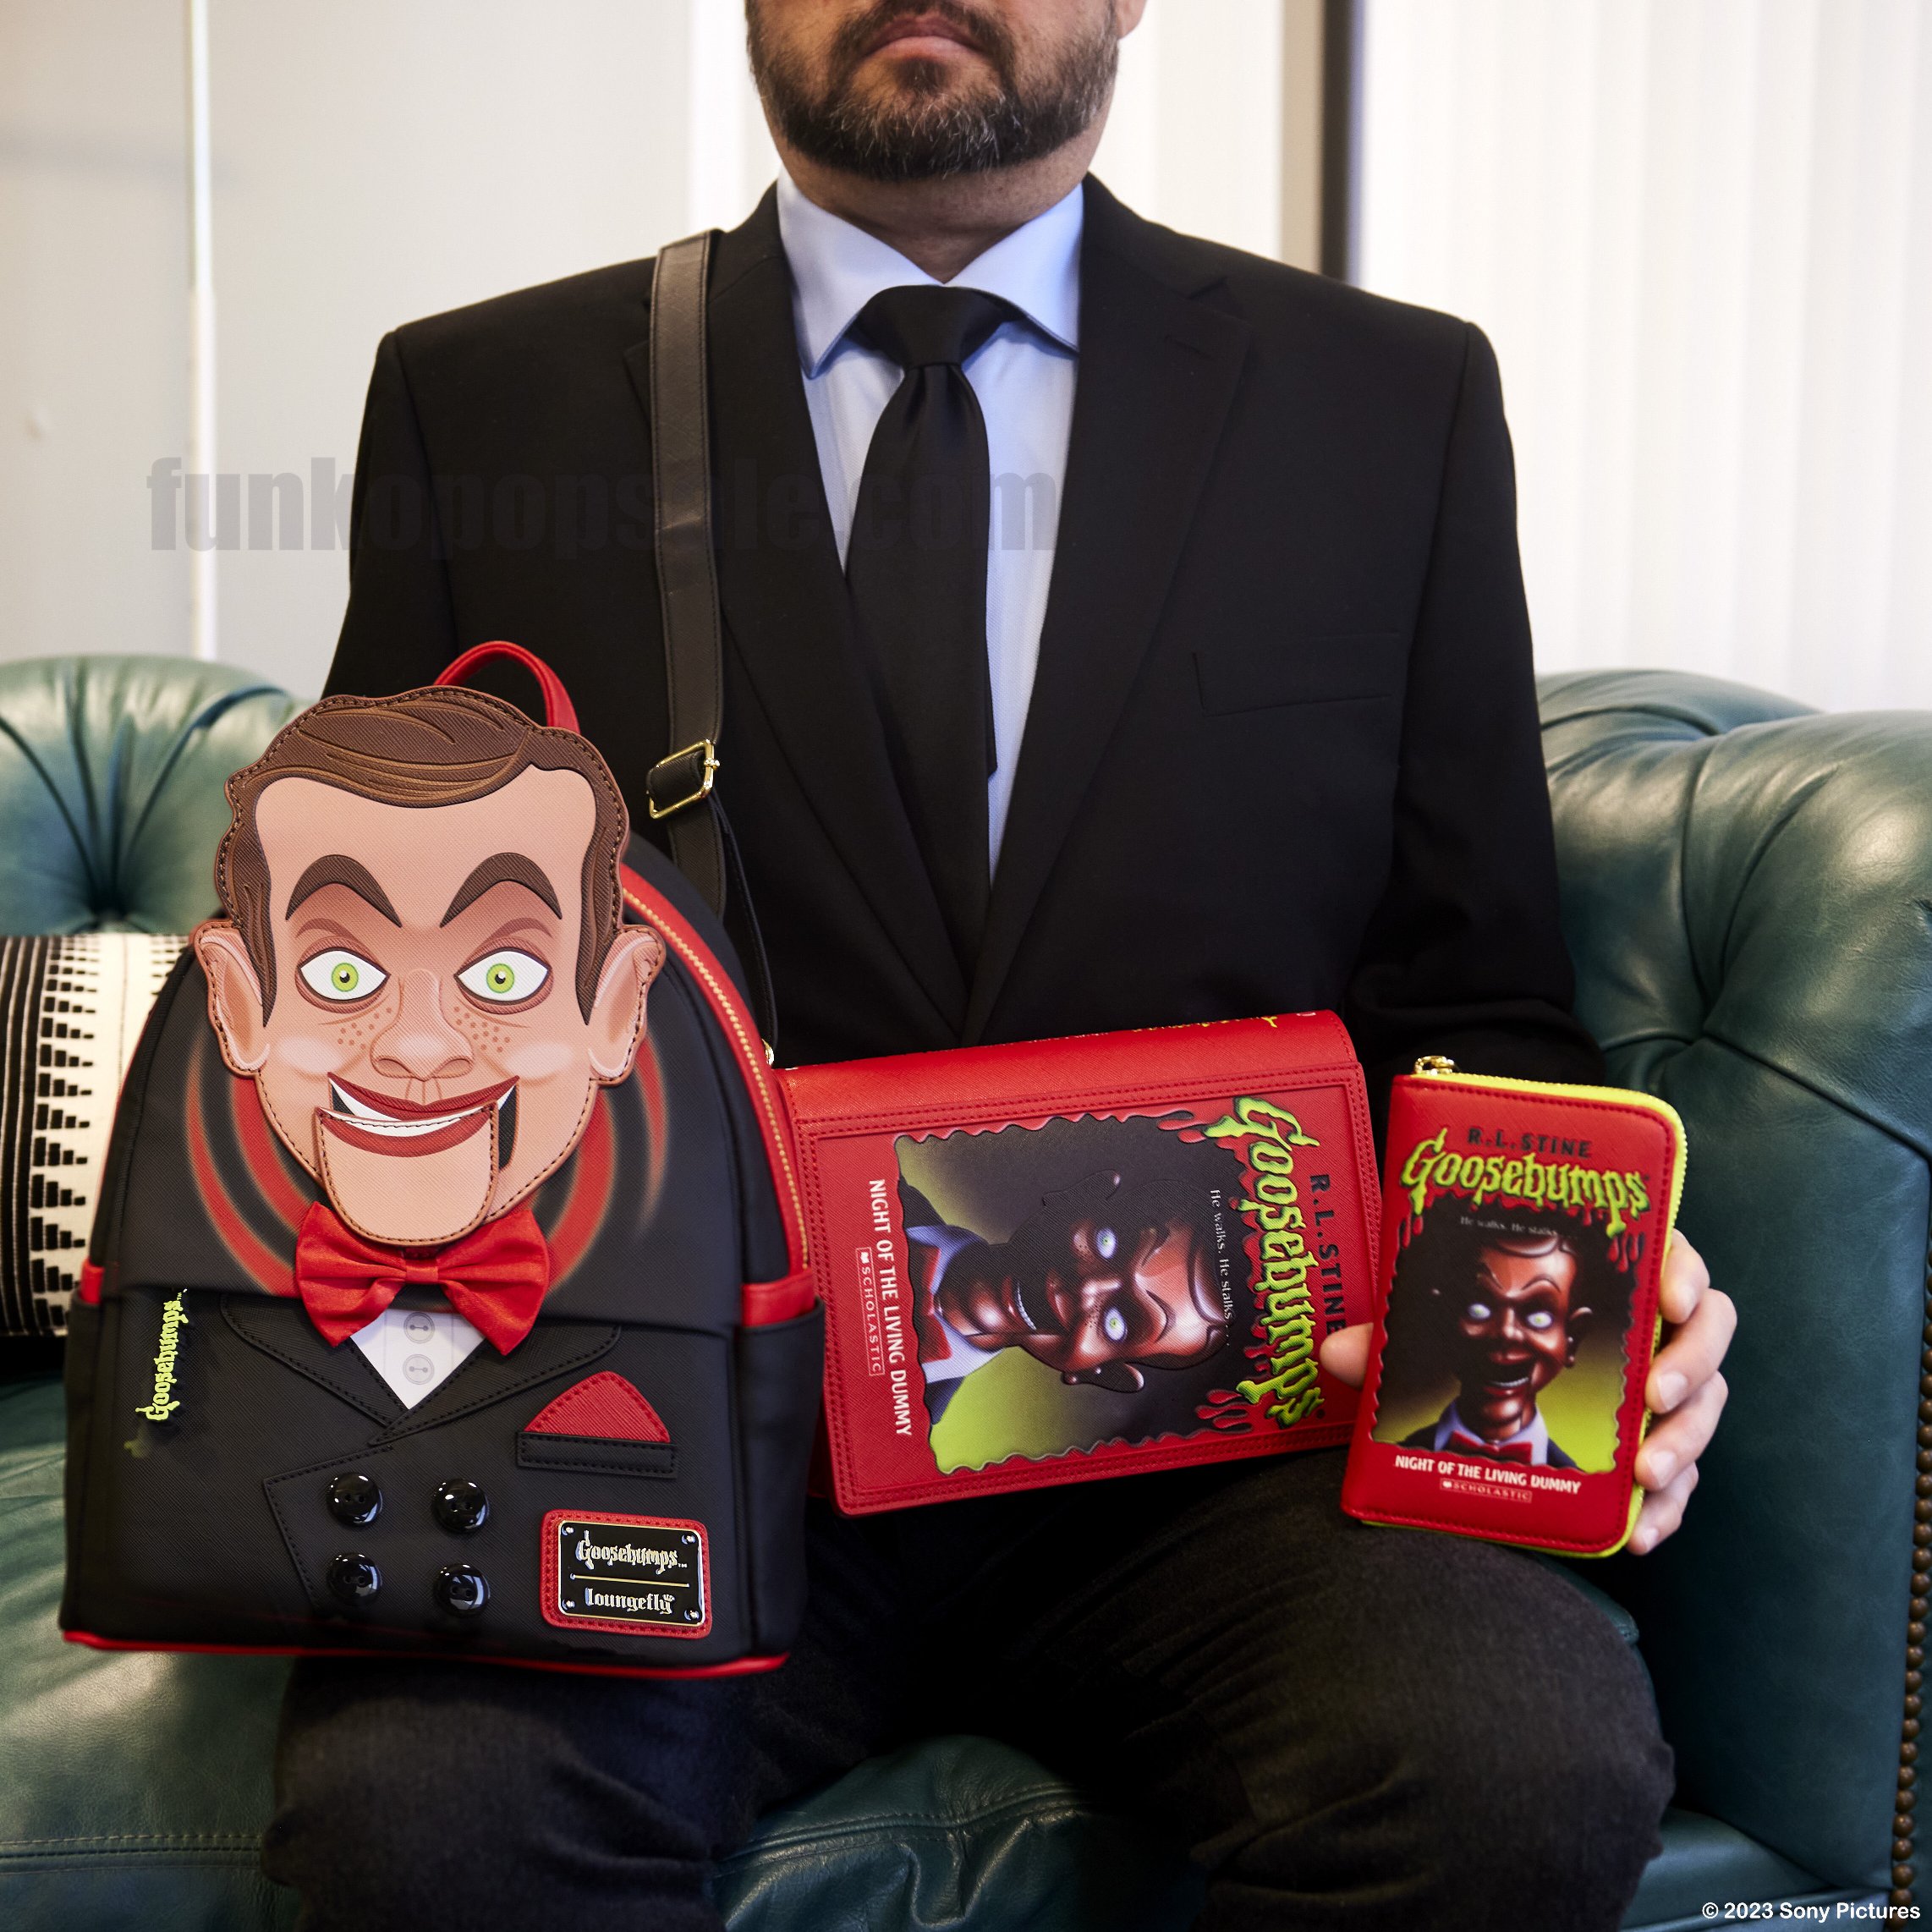 Buy Goosebumps Slappy Cosplay Mini Backpack at Loungefly. F24030-1069 funkopopsale